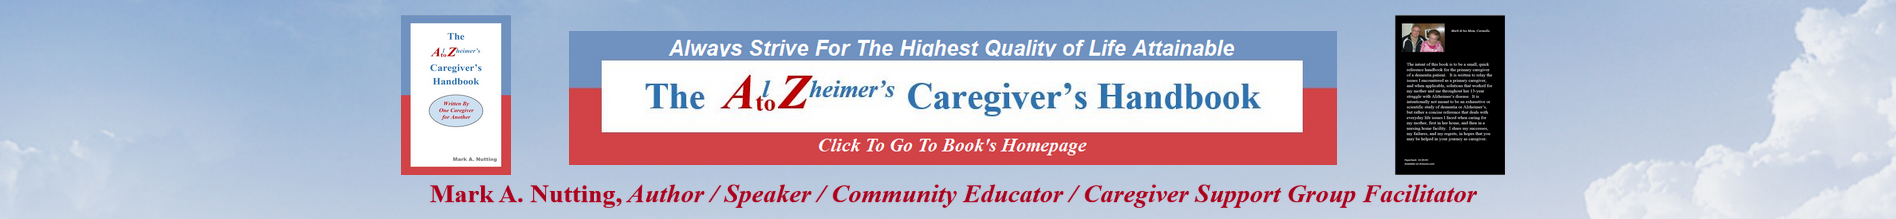 The Alzheimers A to Z Caregivers Handbook by Mark A Nutting Reviews and Interviews